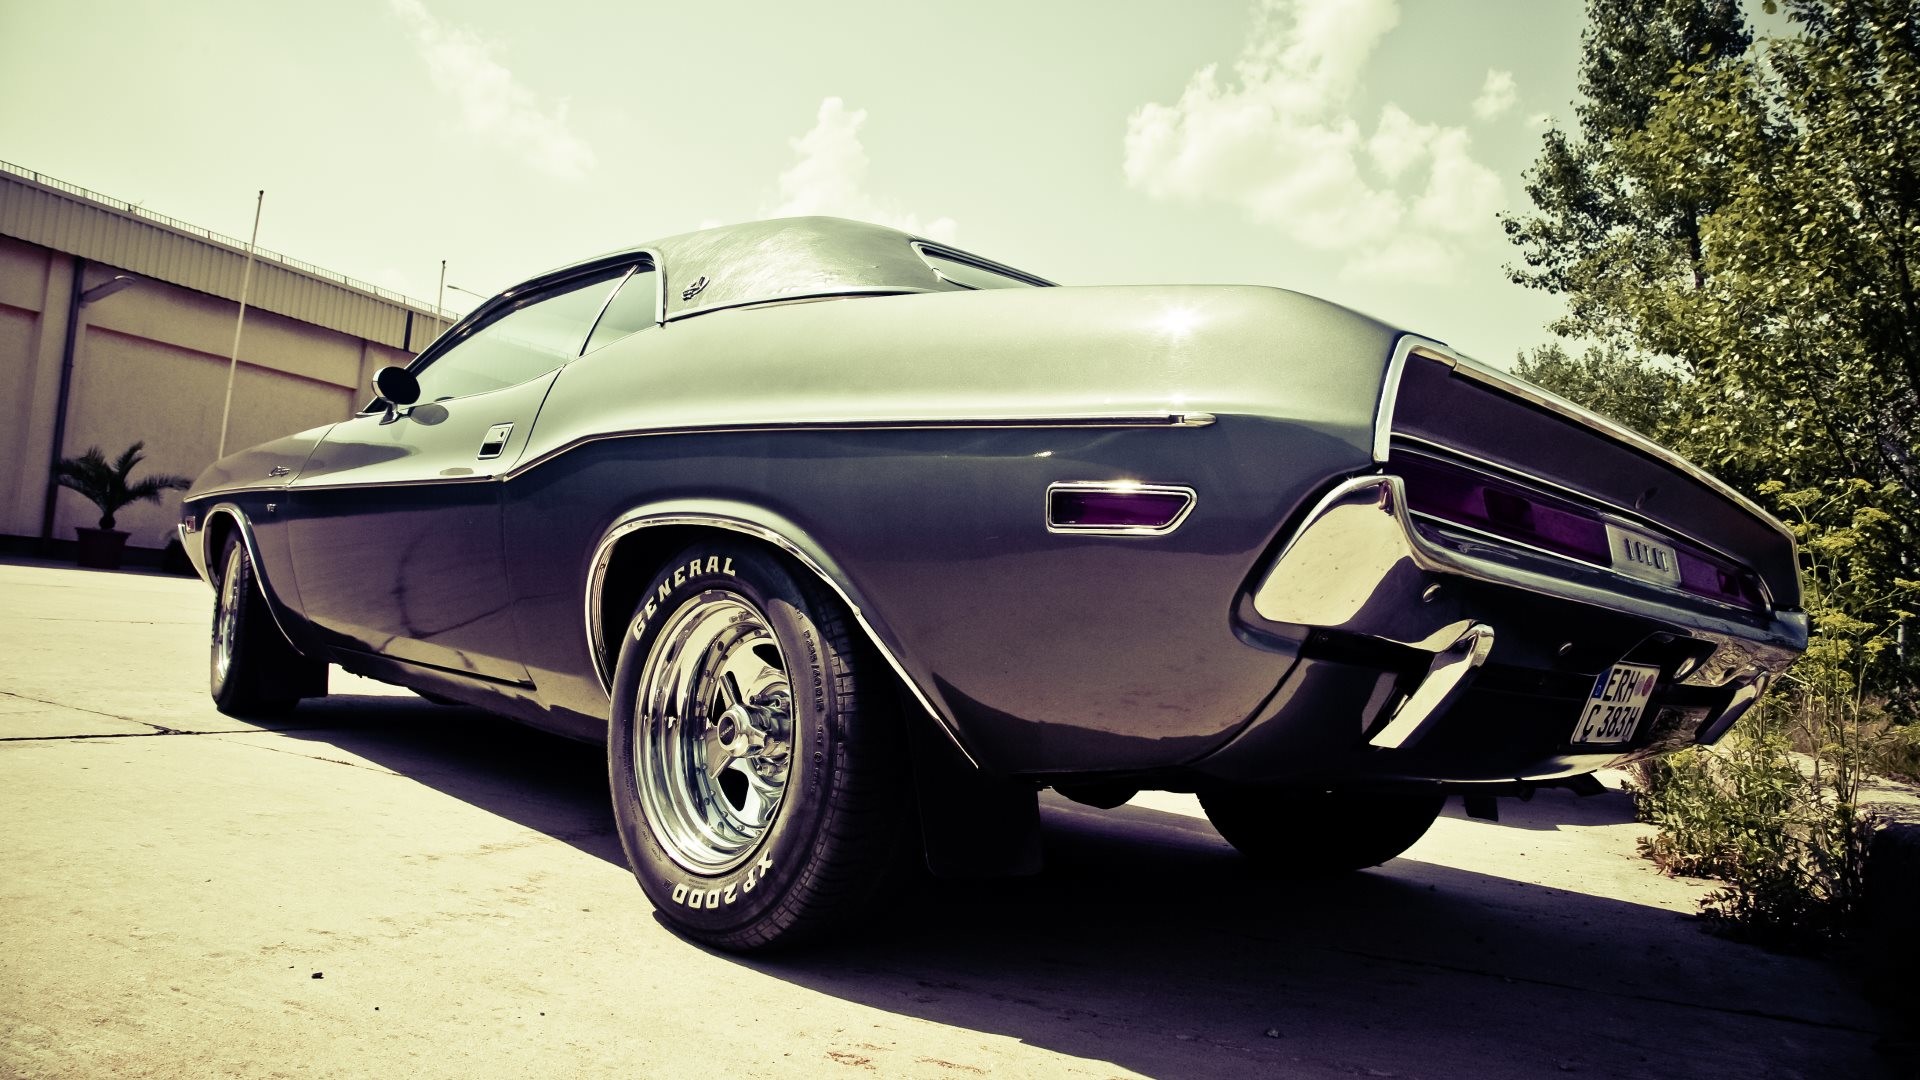 1920x1080 Old Timer Muscle Car Wallpaper in 4K 3840x2160, HD , Phone  1080x1920 and wide 2880x1800 sizes